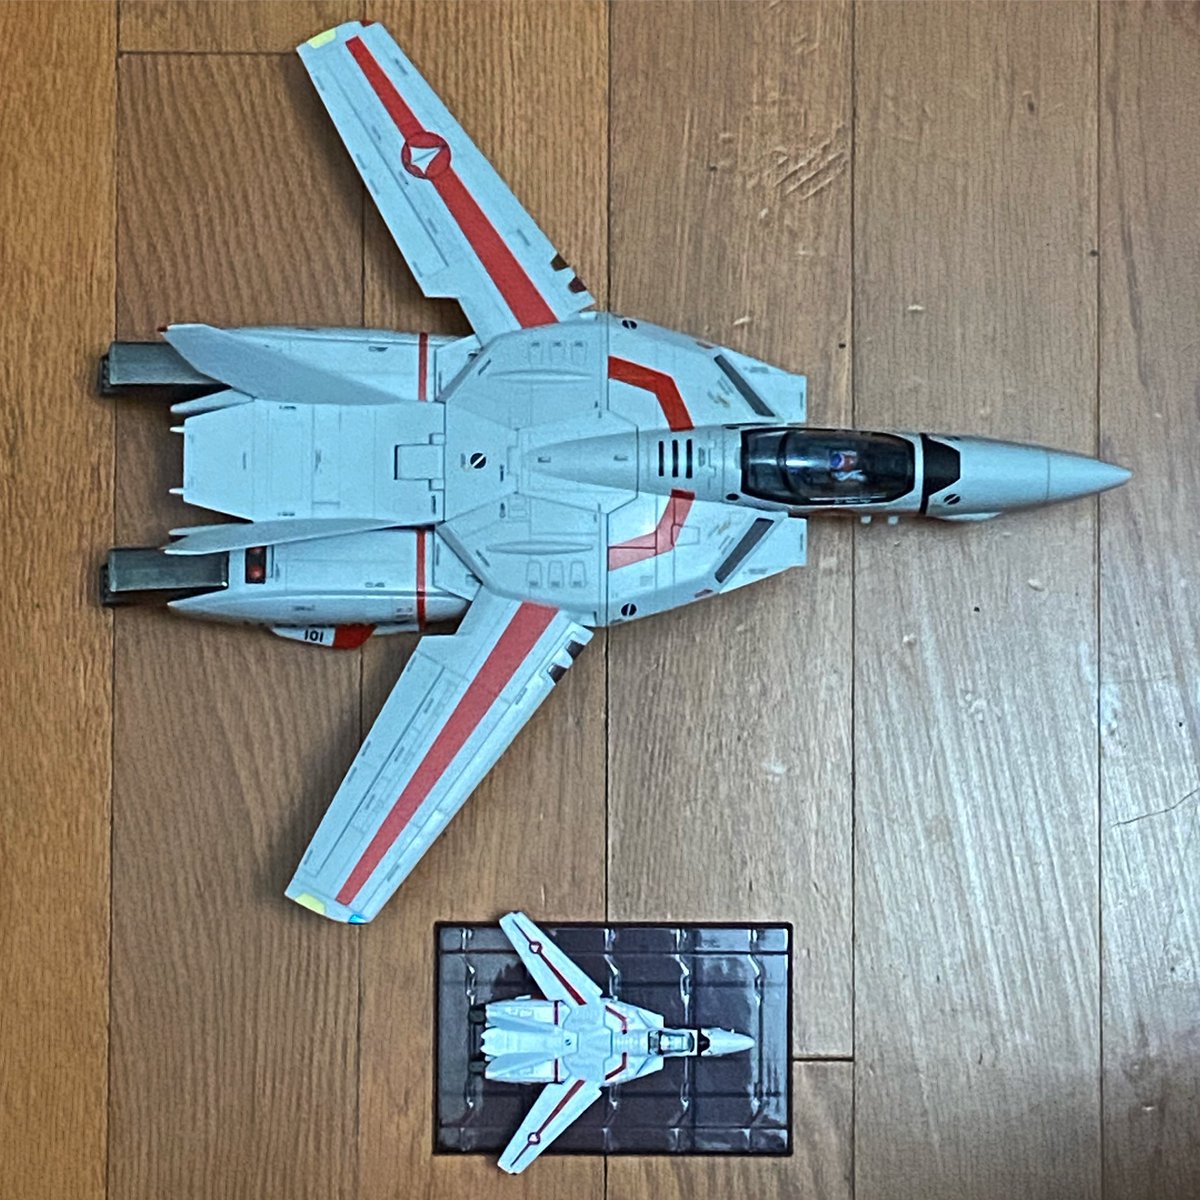 Smallest and largest diecast VF-1J? #macross #マクロス